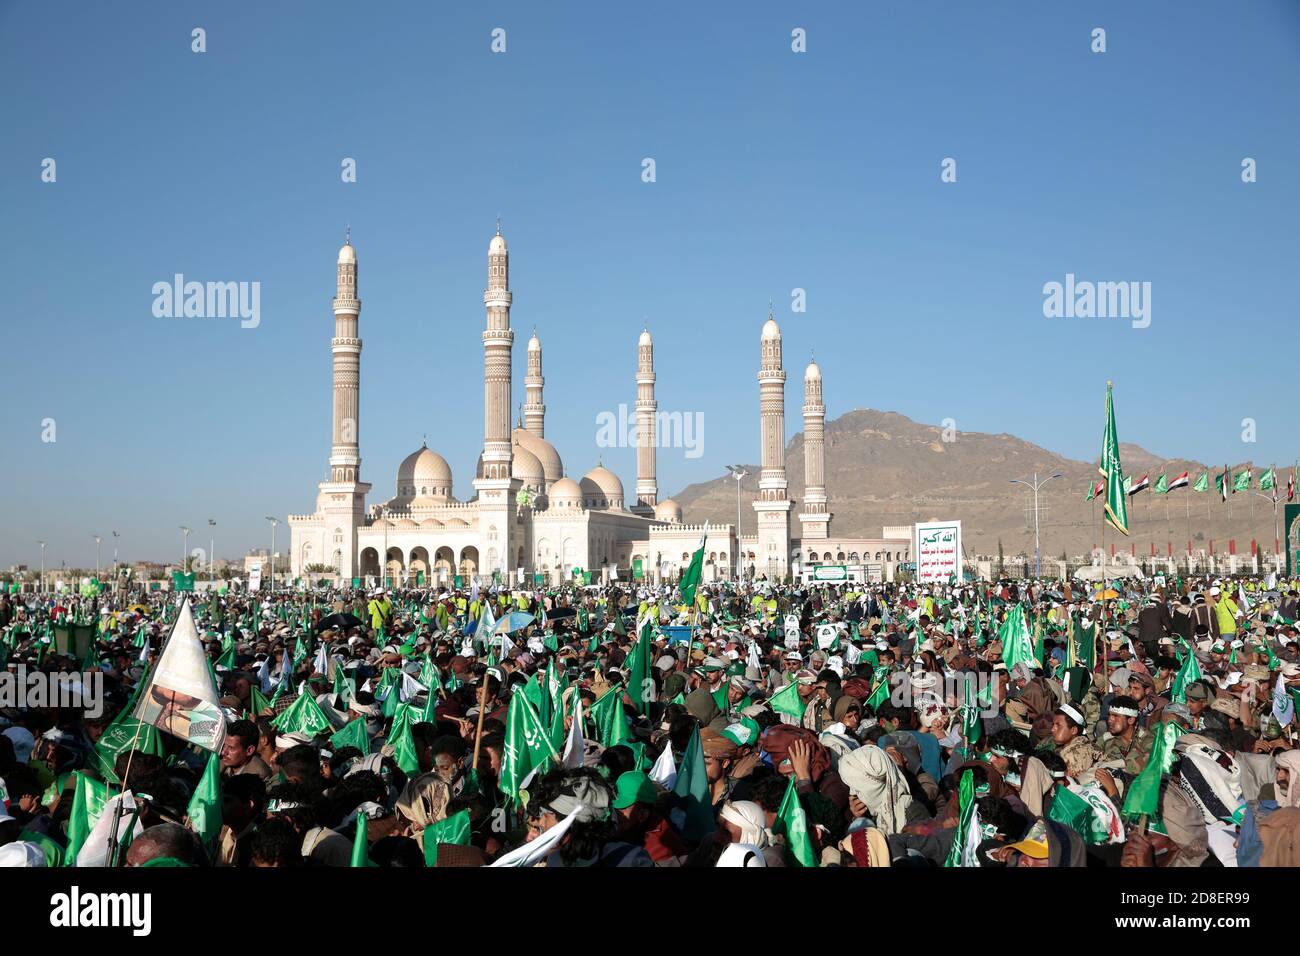 Sanaa, Yemen. 29th Oct, 2020. Houthi rebels and their supporters gather outside Al Saleh Mosque during a celebration marking the anniversary of the birth of Islam's Prophet Muhammad (Mawlid al-Nabi) in Sanaa. Credit: Hani Al-Ansi/dpa/Alamy Live News Stock Photo